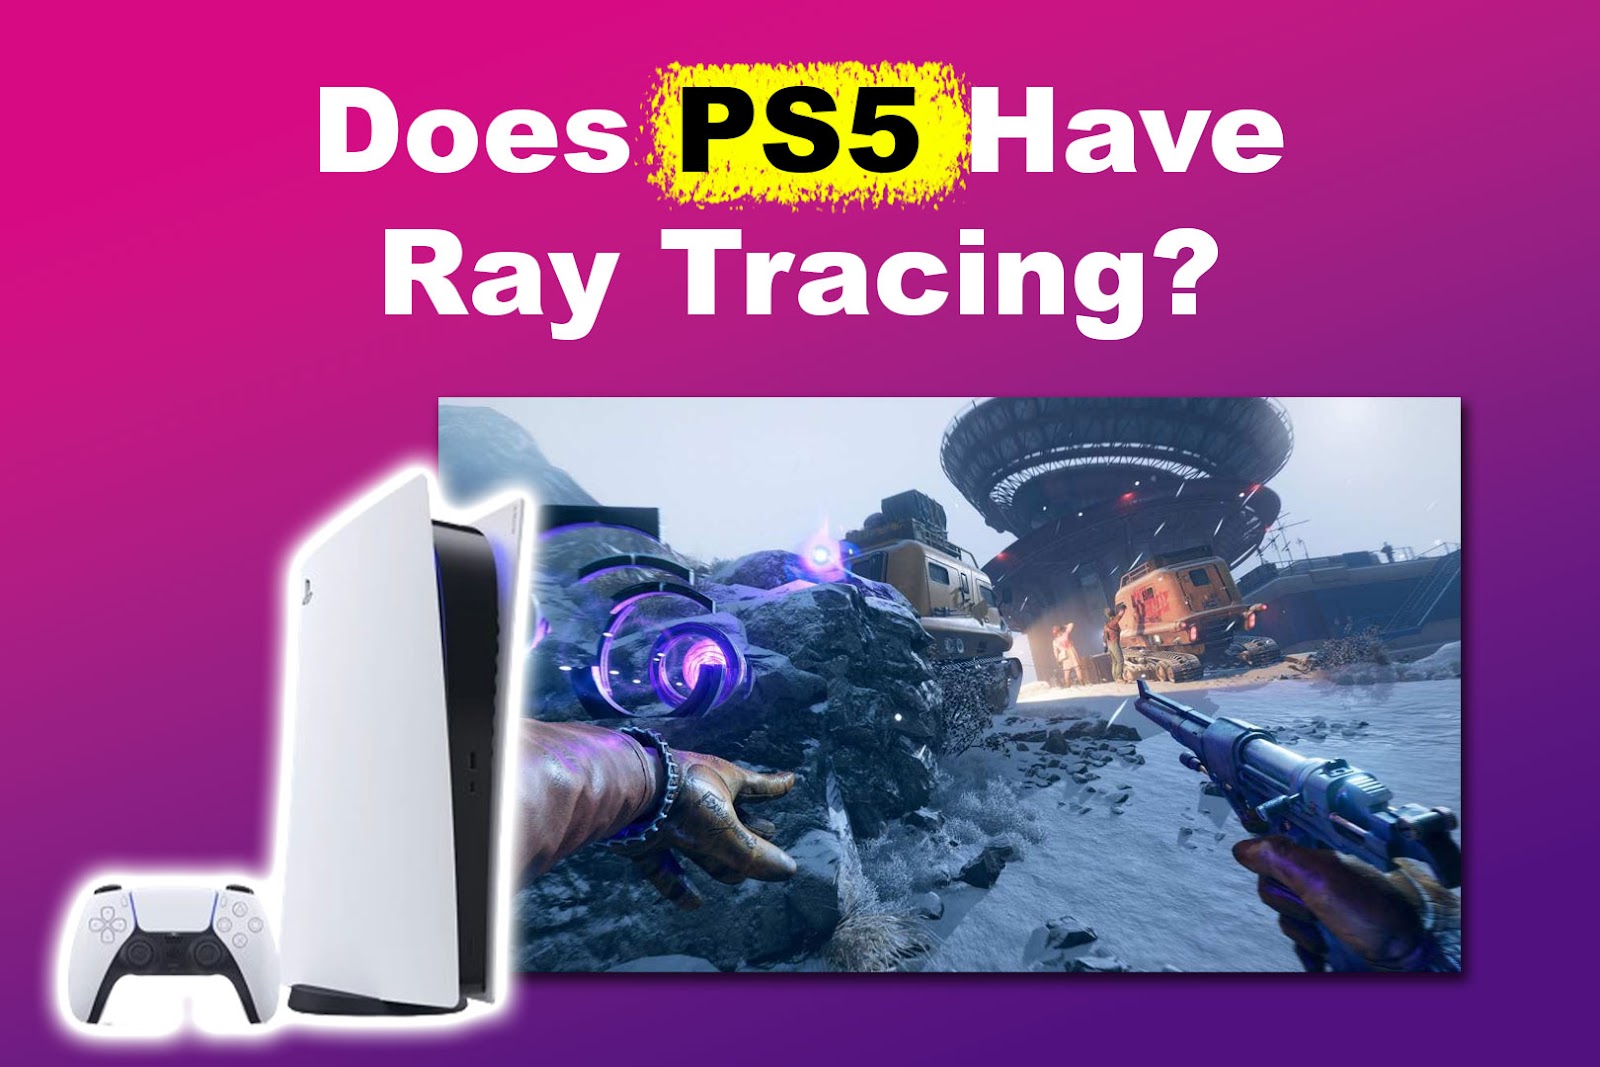 Does PS5 Have Ray Tracing